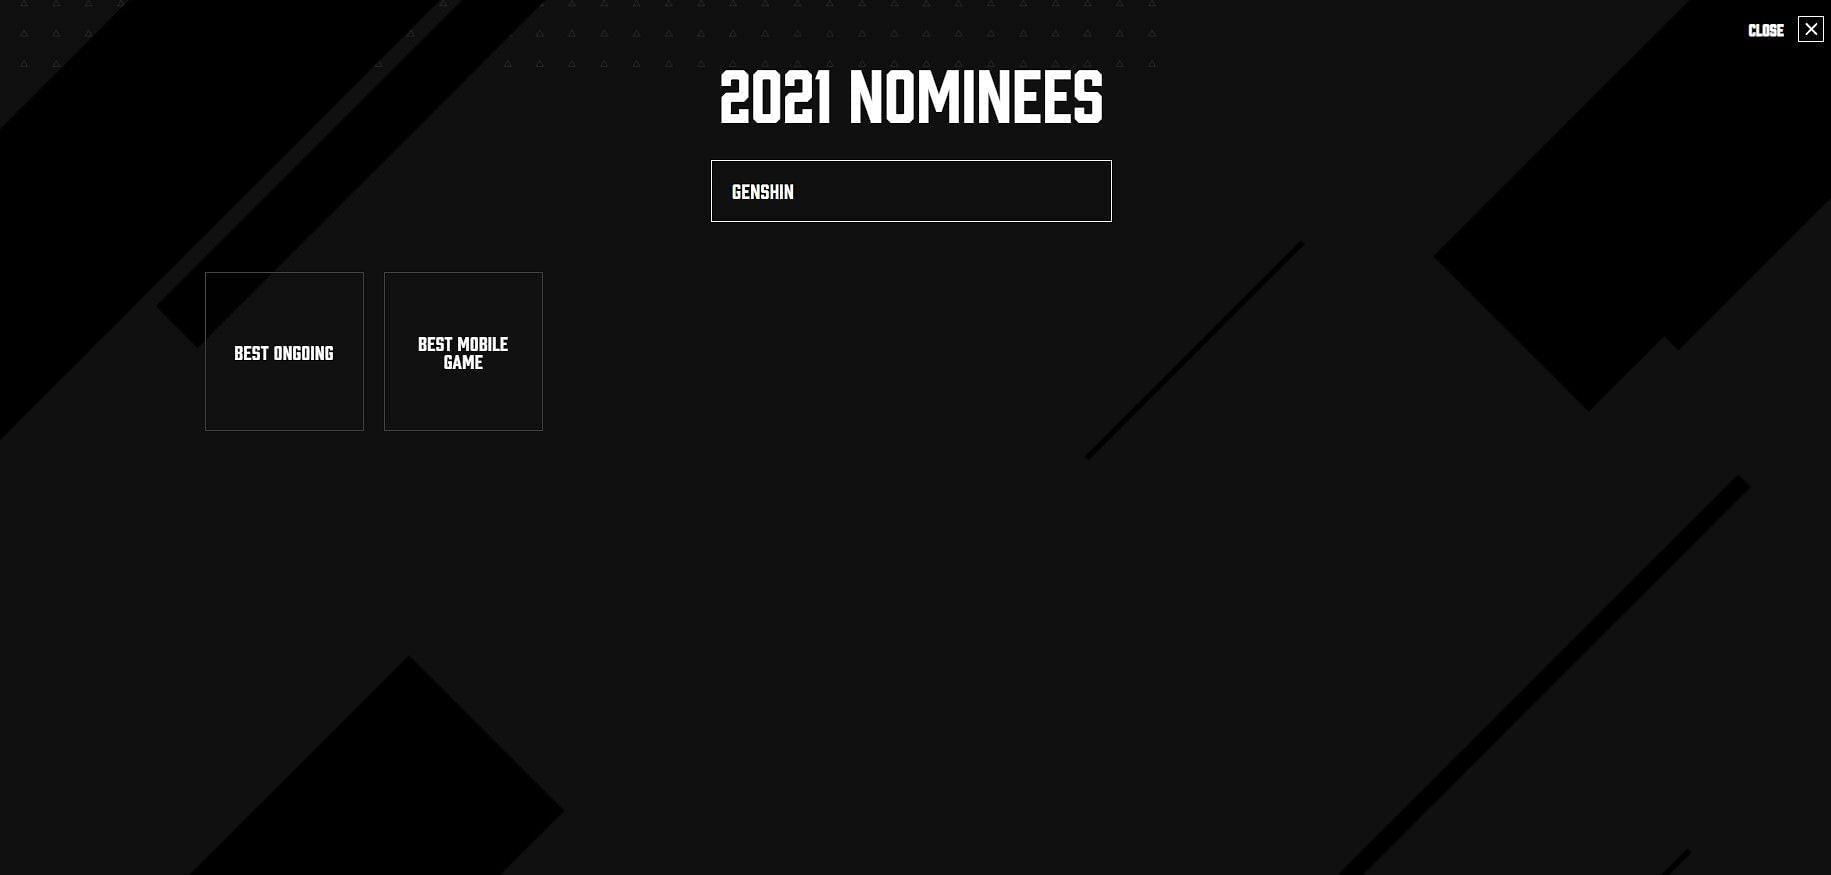 The two categories that Genshin Impact was nominated for (Image via The Game Awards 2021)